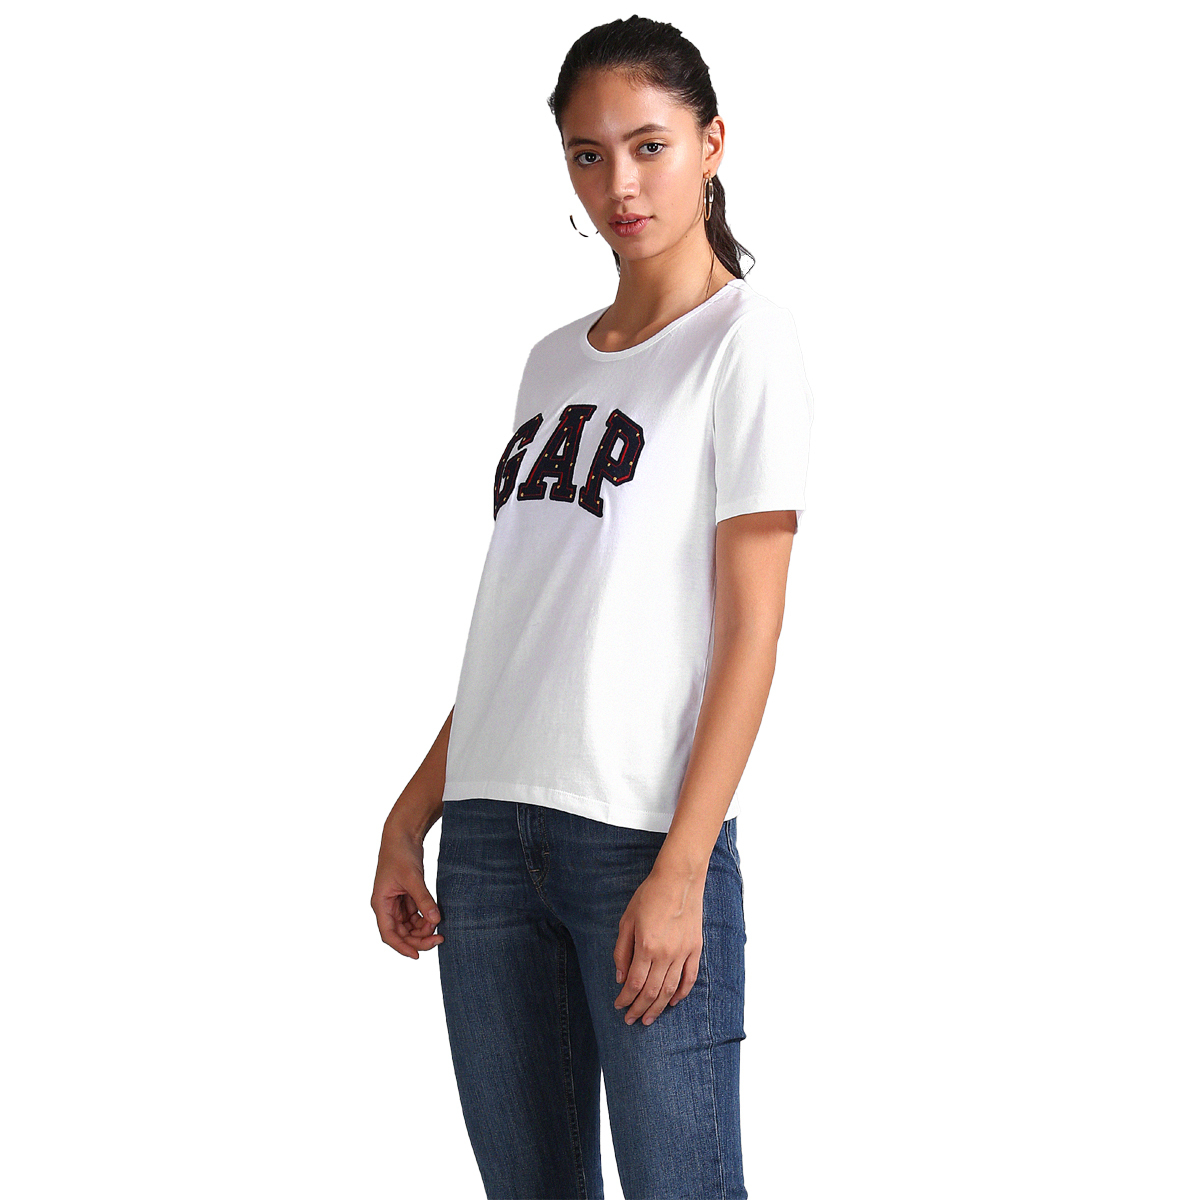 Gap Solid Color Round Neck Short Sleeve T-Shirt Styled with Logo Applique - White